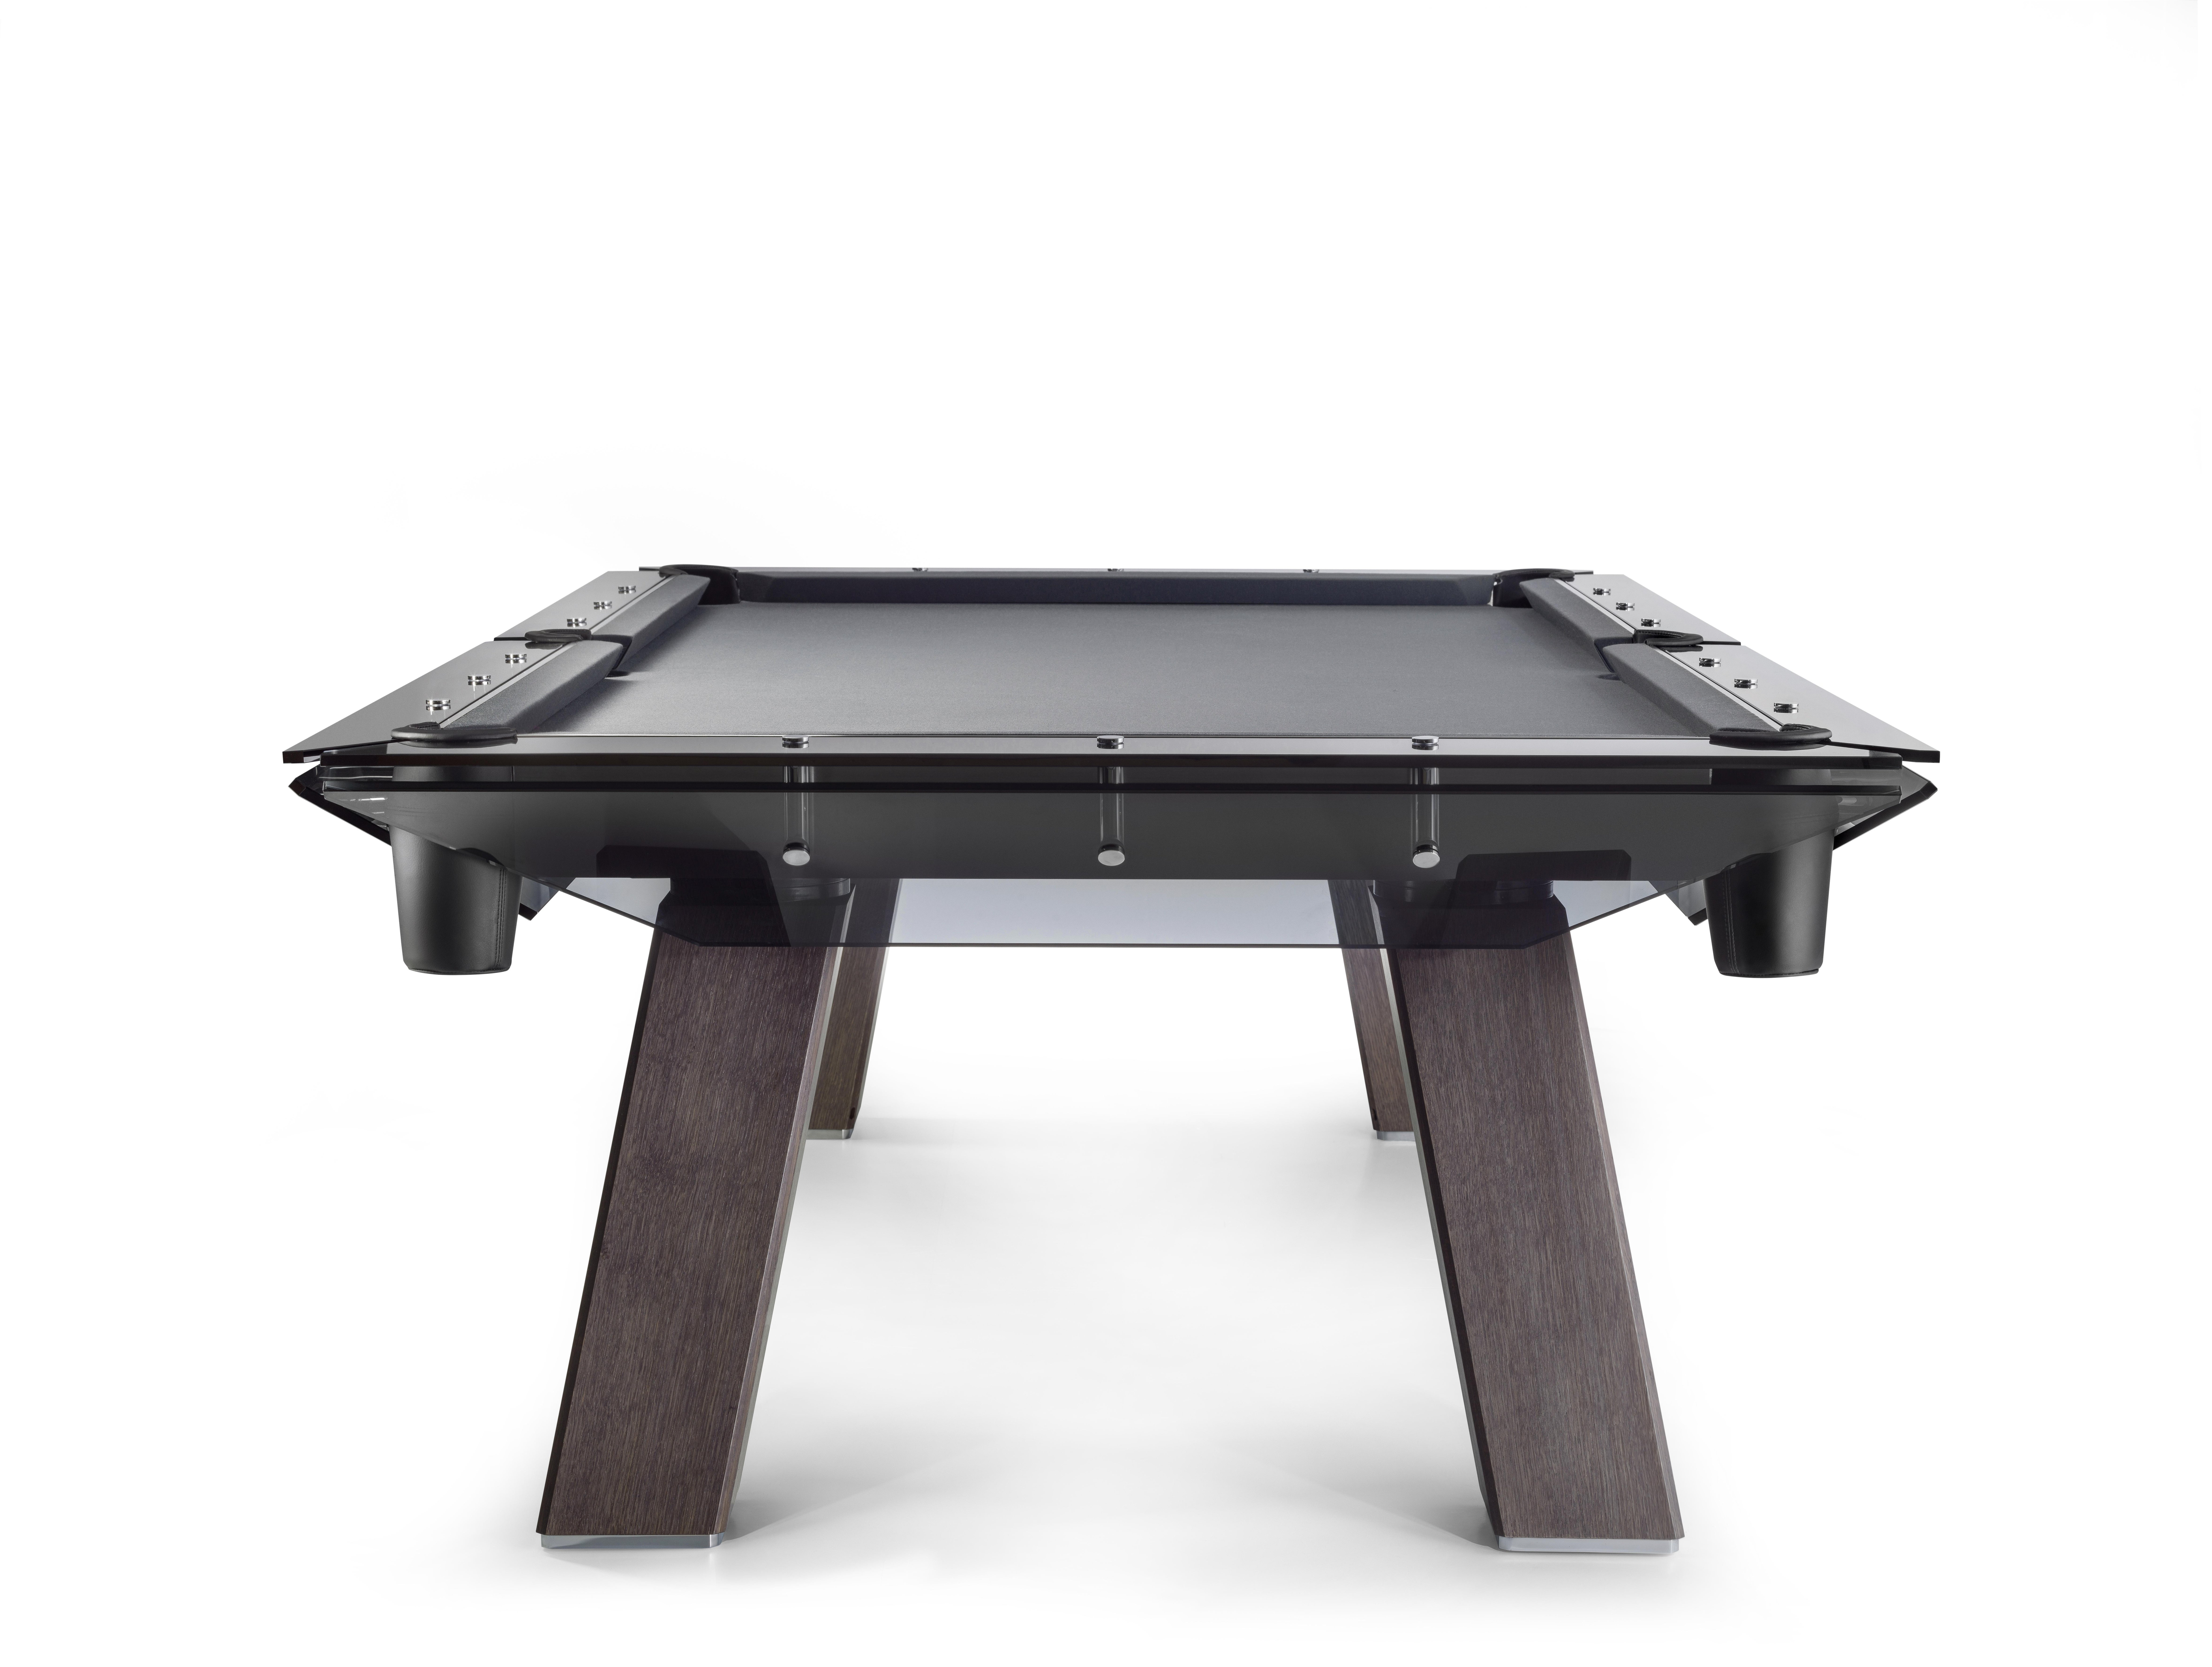 Filotto Wood Dark Oak Smoked Glass Player Pool table by Impatia
Dimensions: D268 x W152 x H82 cm
Weight: 640 kg
Material: Frame in low-iron glass.Legs in wood.Metal components.Three piece Italian slate base,Simonis cloth,Leather pockets.
Also